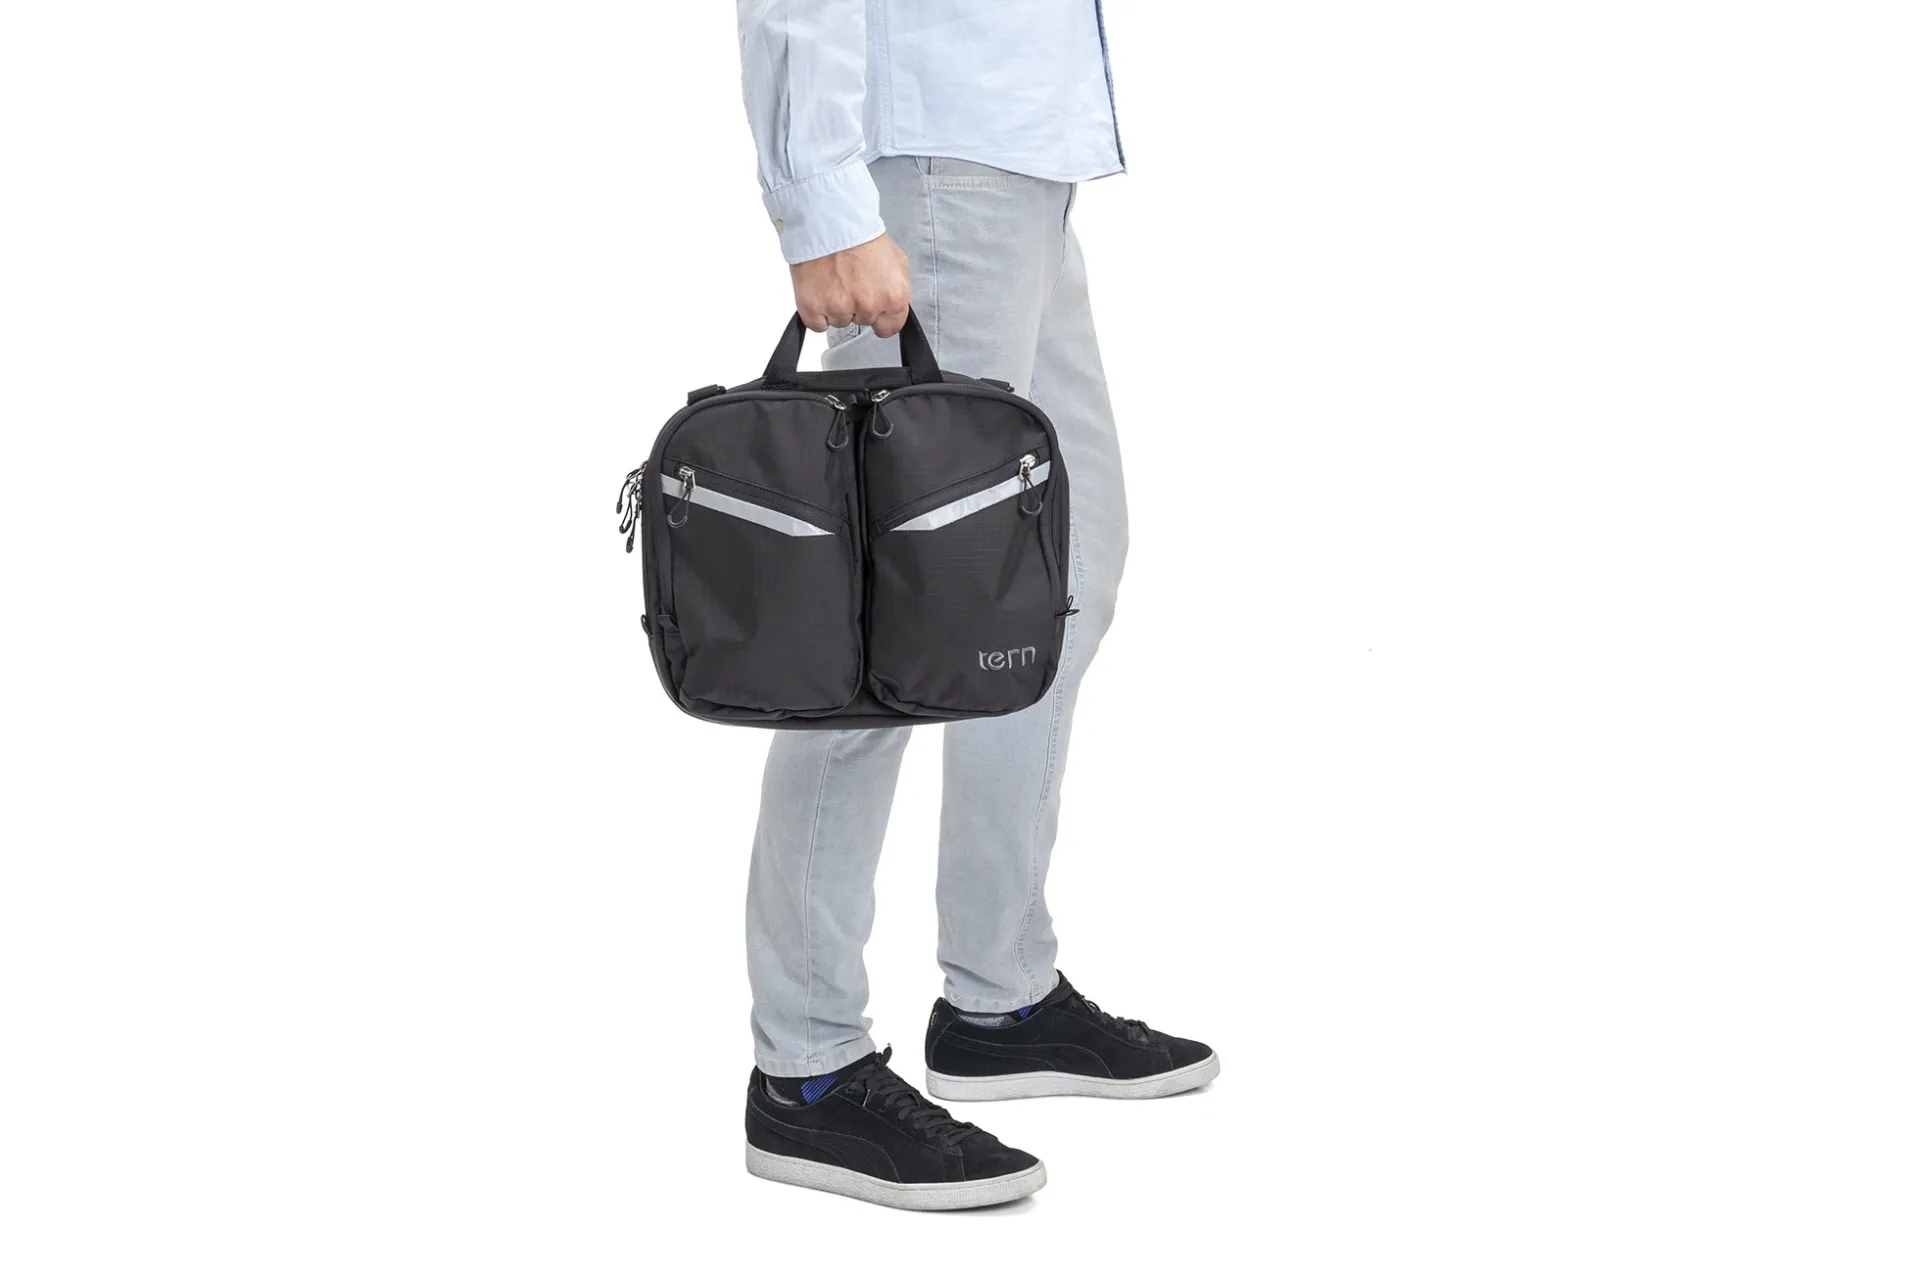 HQ Bag: Office bag that attaches to Tern Bikes | Tern Bicycles